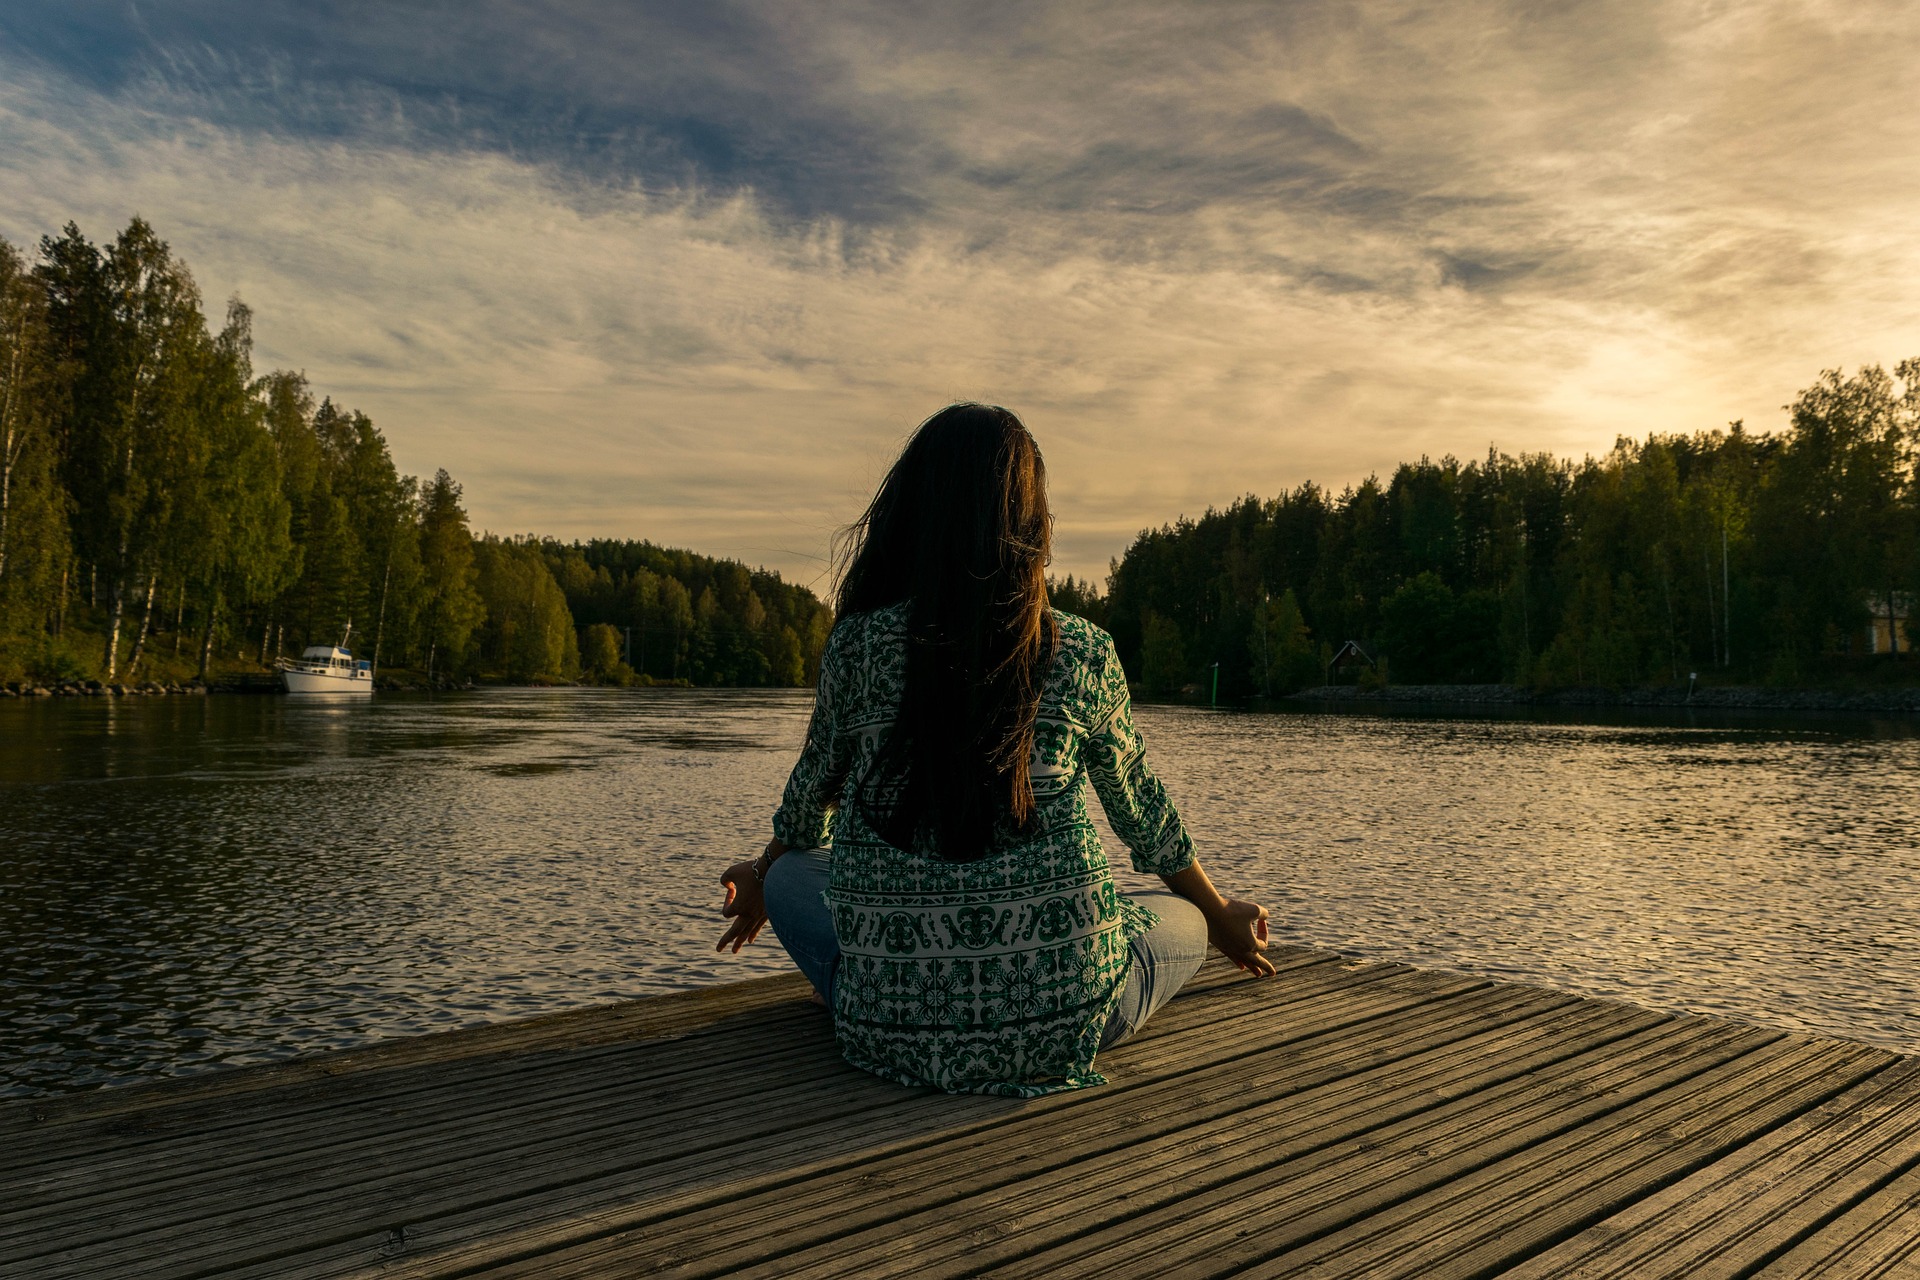 “The beauty benefits of meditation and mindfulness”